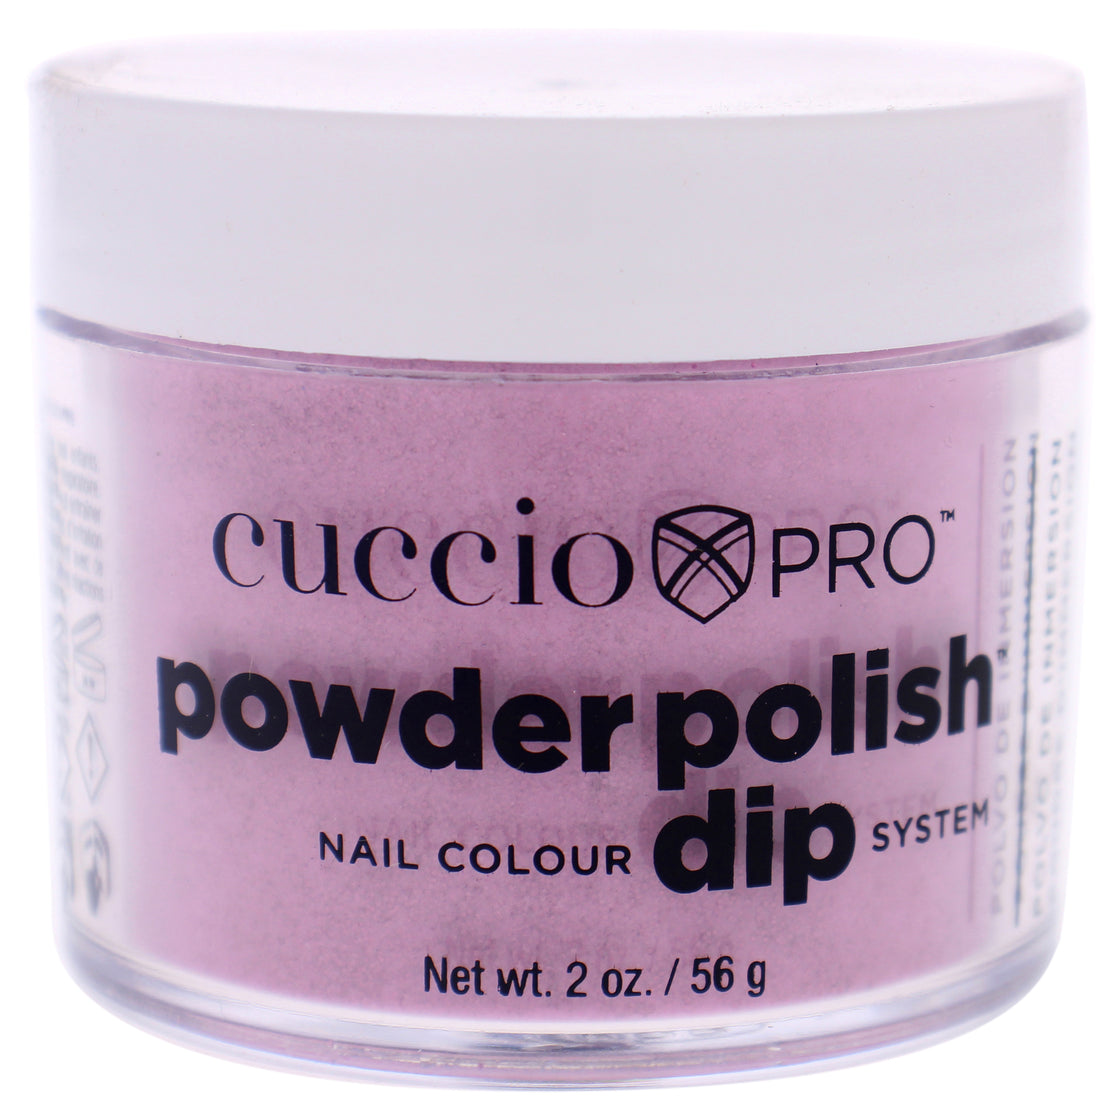 Pro Powder Polish Nail Colour Dip System - Deep Pink With Pink Glitter by Cuccio Pro for Women - 1.6 oz Nail Powder